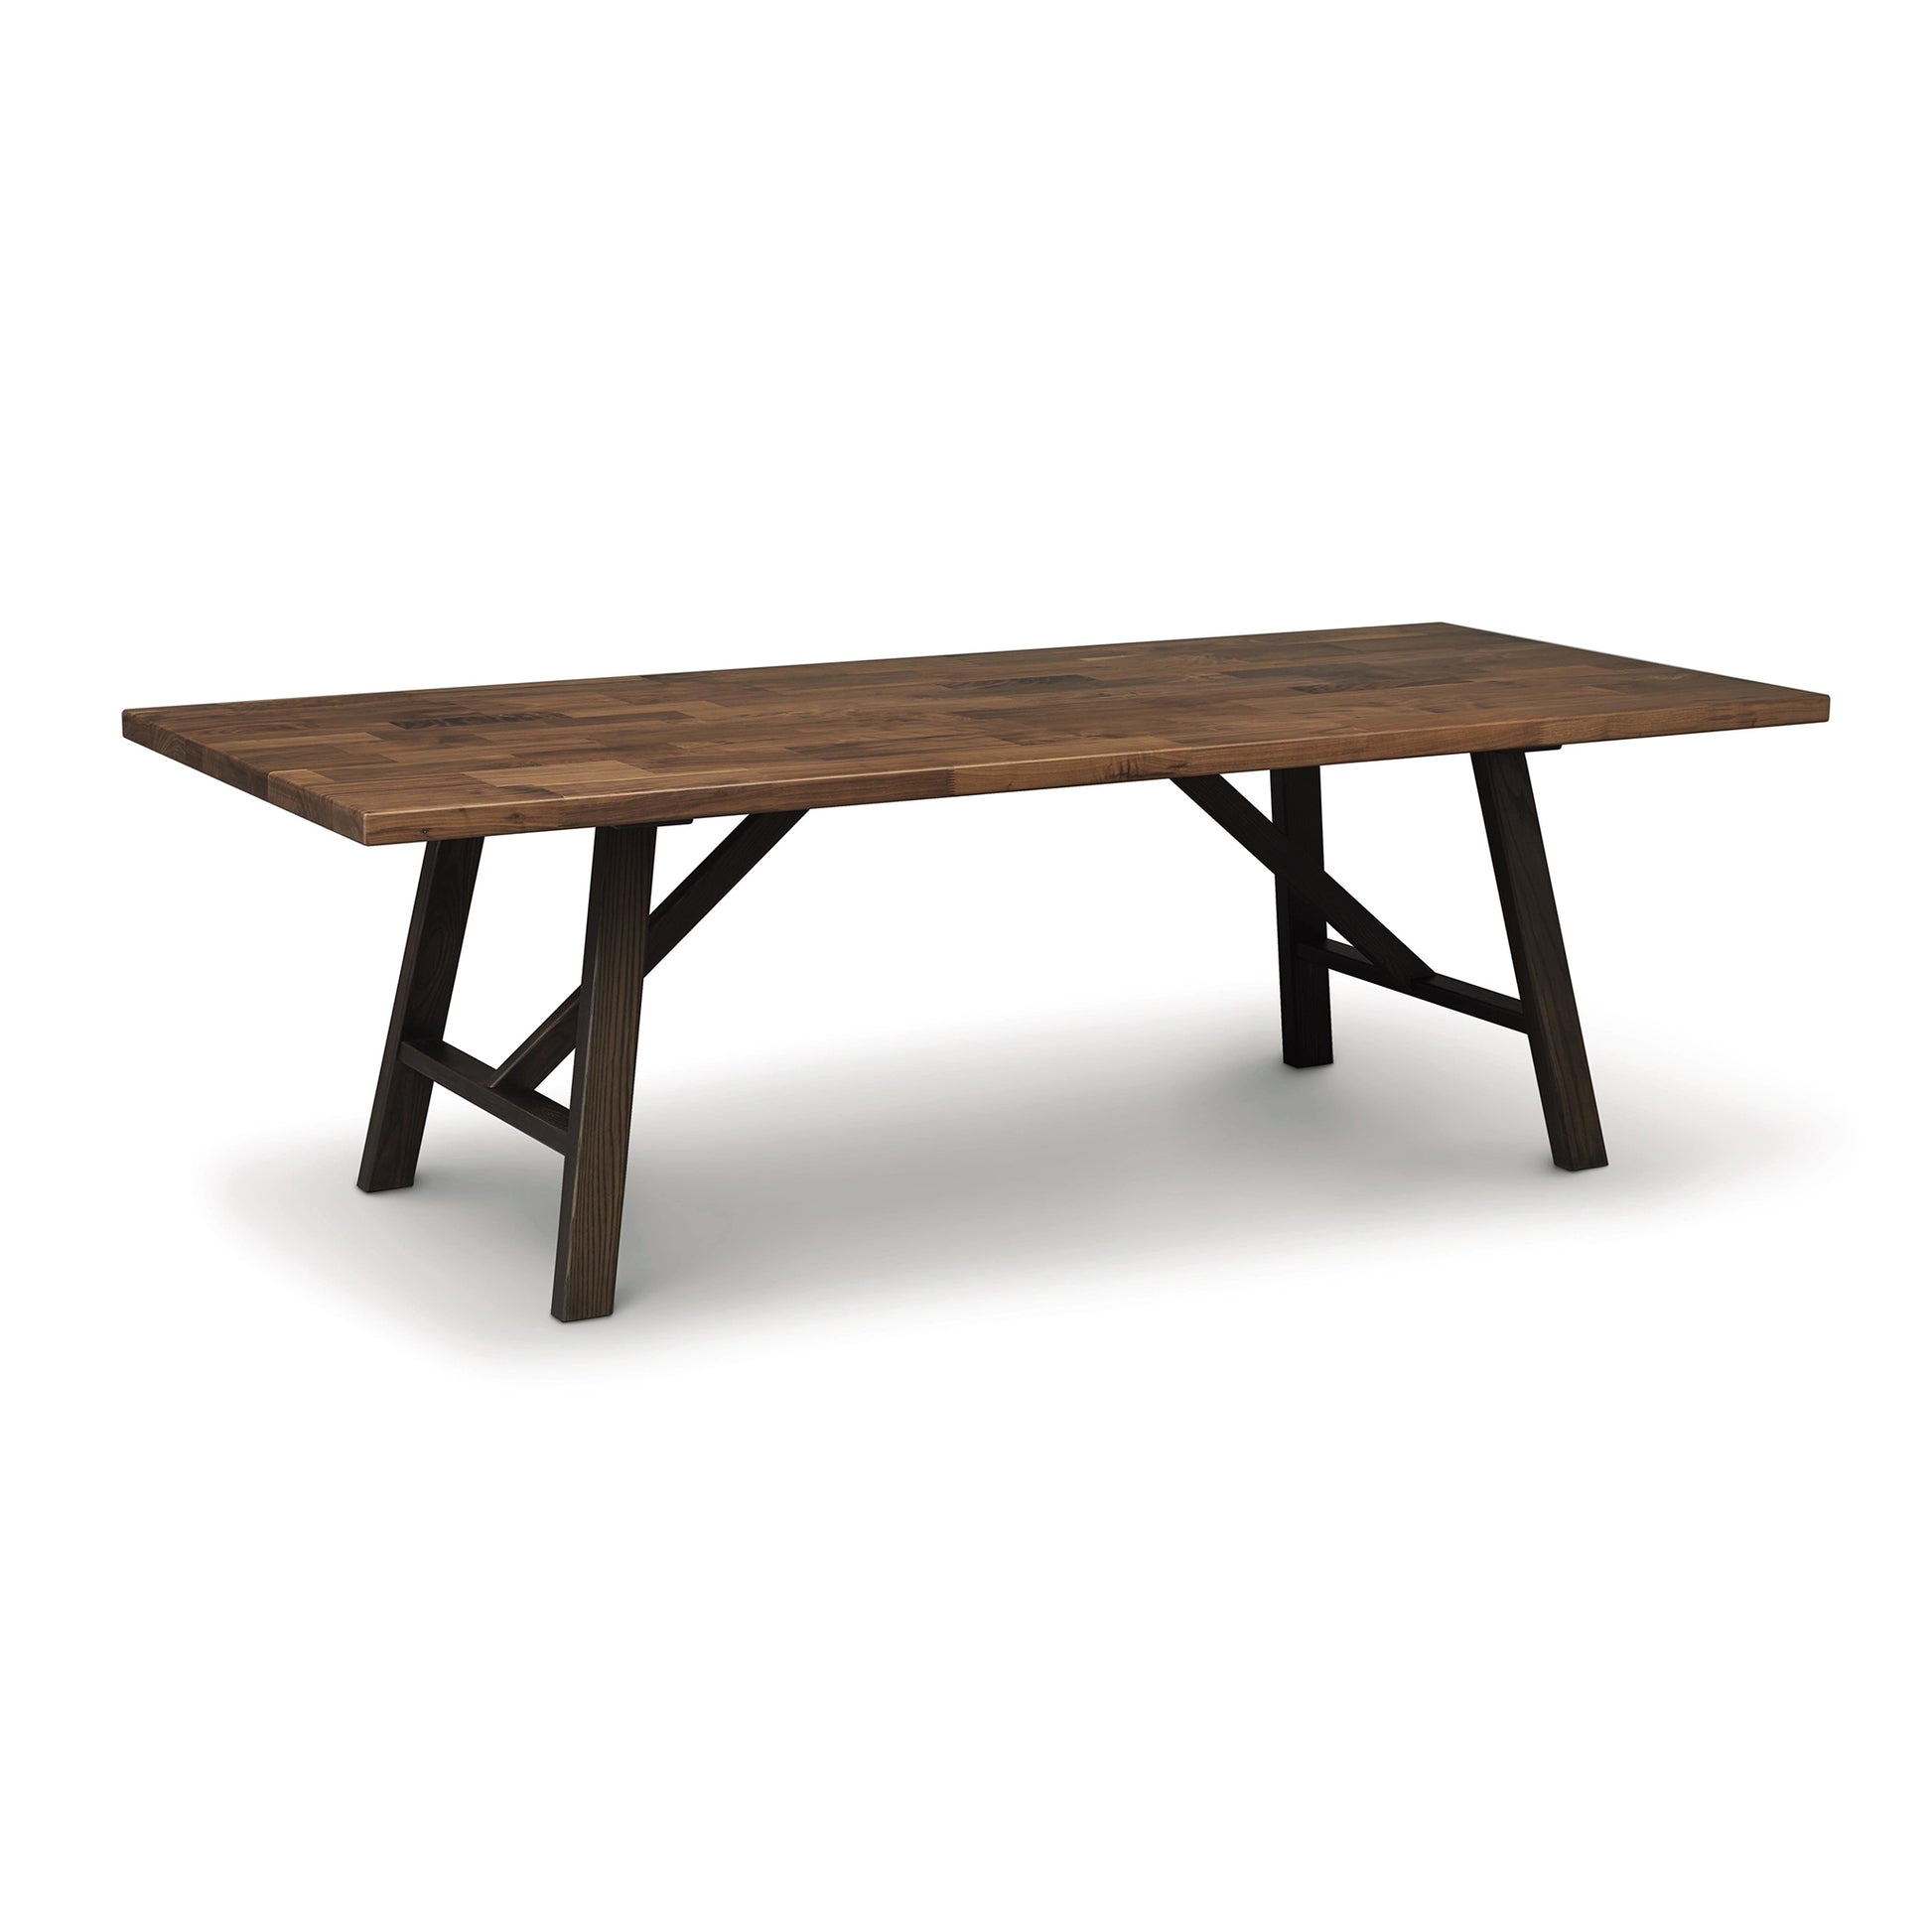 A Modern Farmhouse Trestle Farm Table with a plank-style top and x-shaped legs, crafted from natural cherry hardwood by Copeland Furniture, on a white background.